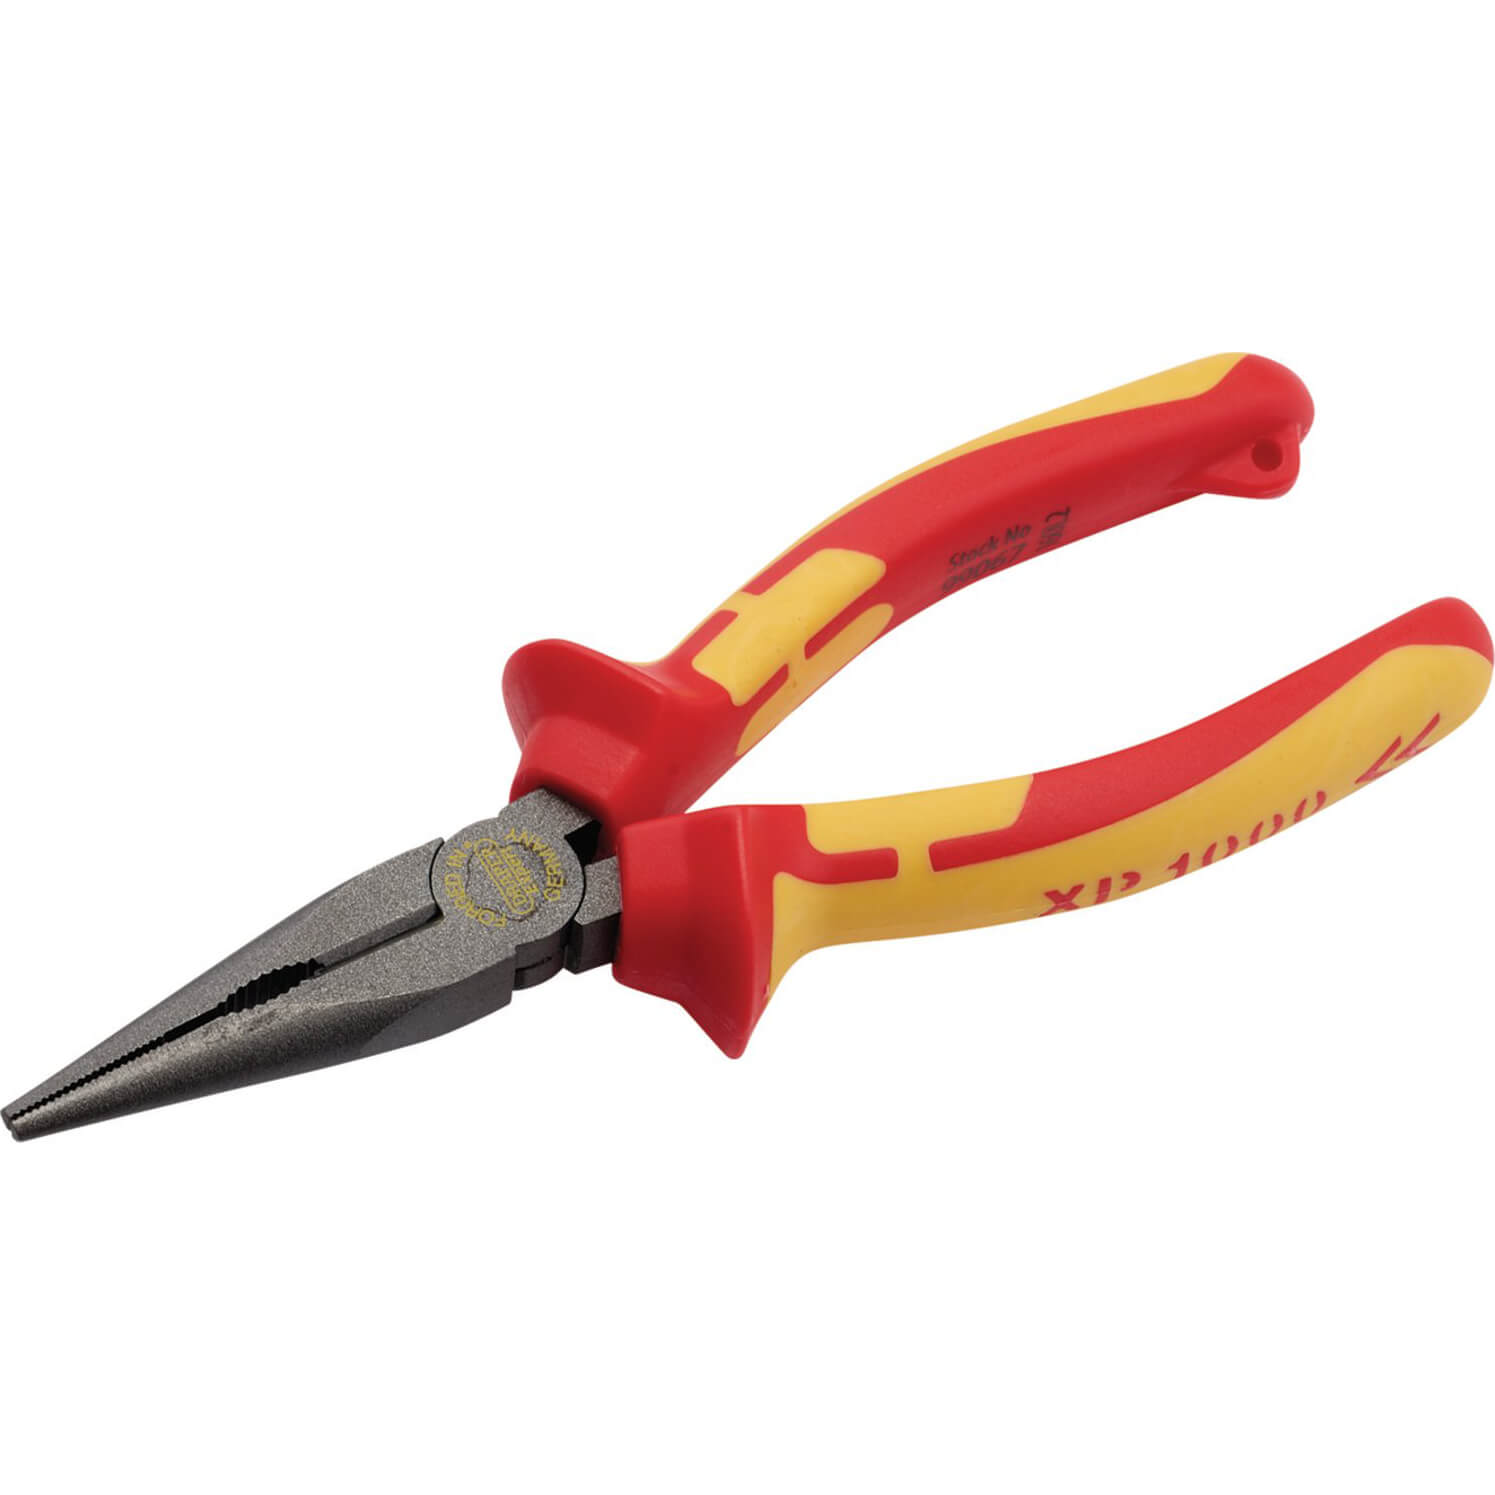 Image of Draper XP1000 VDE Insulated Tethered Long Nose Pliers 160mm